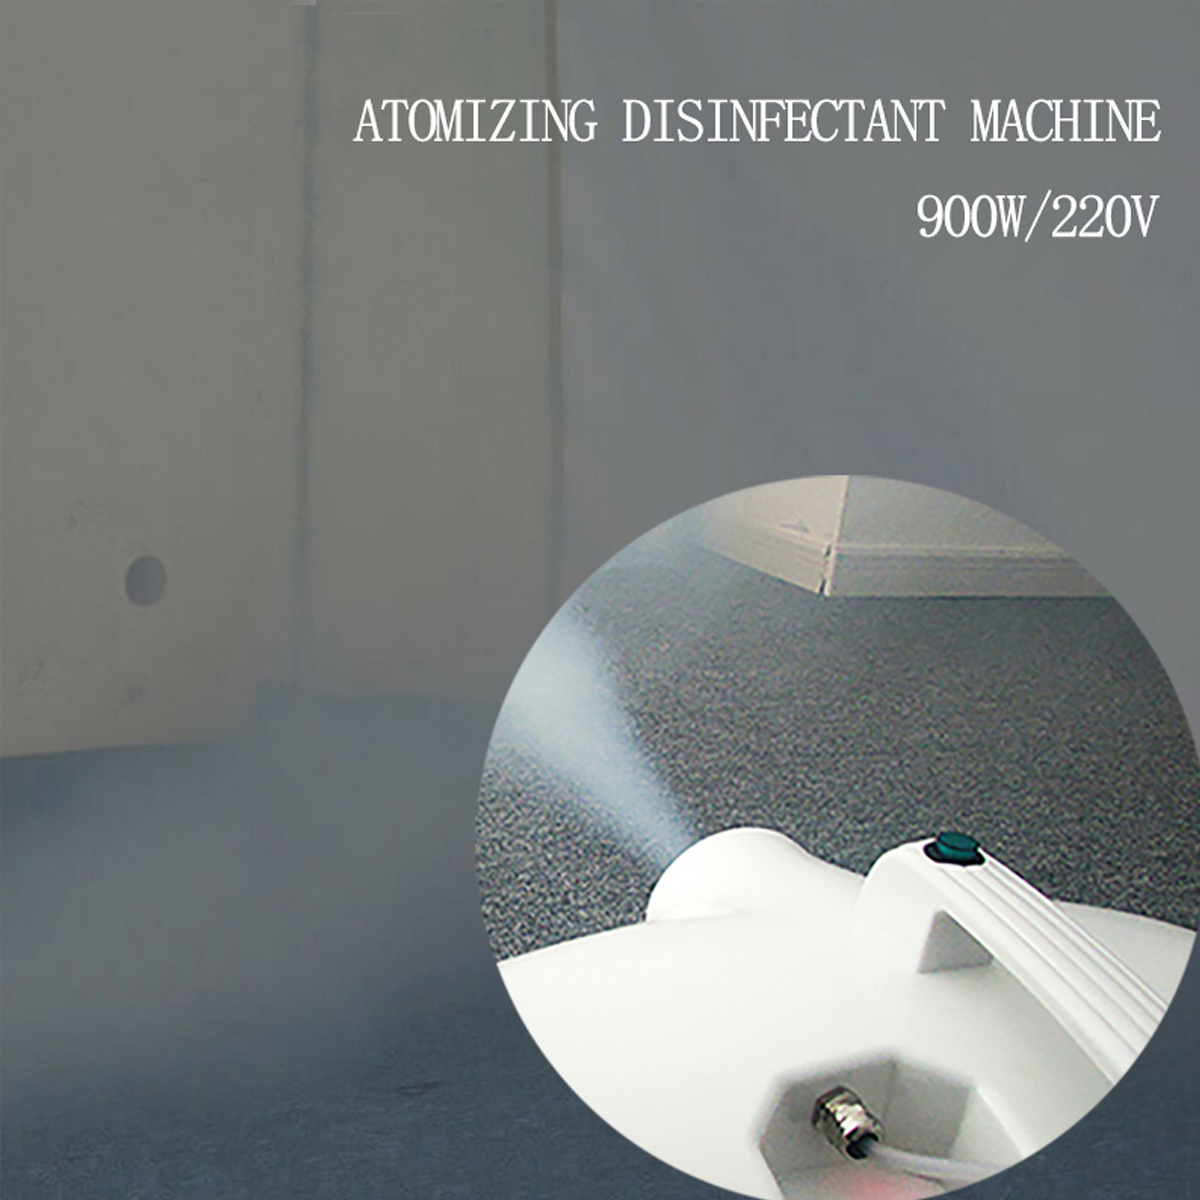 220V-Car-Air-Conditioning-Atomization-Smoke-Disinfection-Machine-Sterilization-Disinfection-Odor-Rem-1666482-6